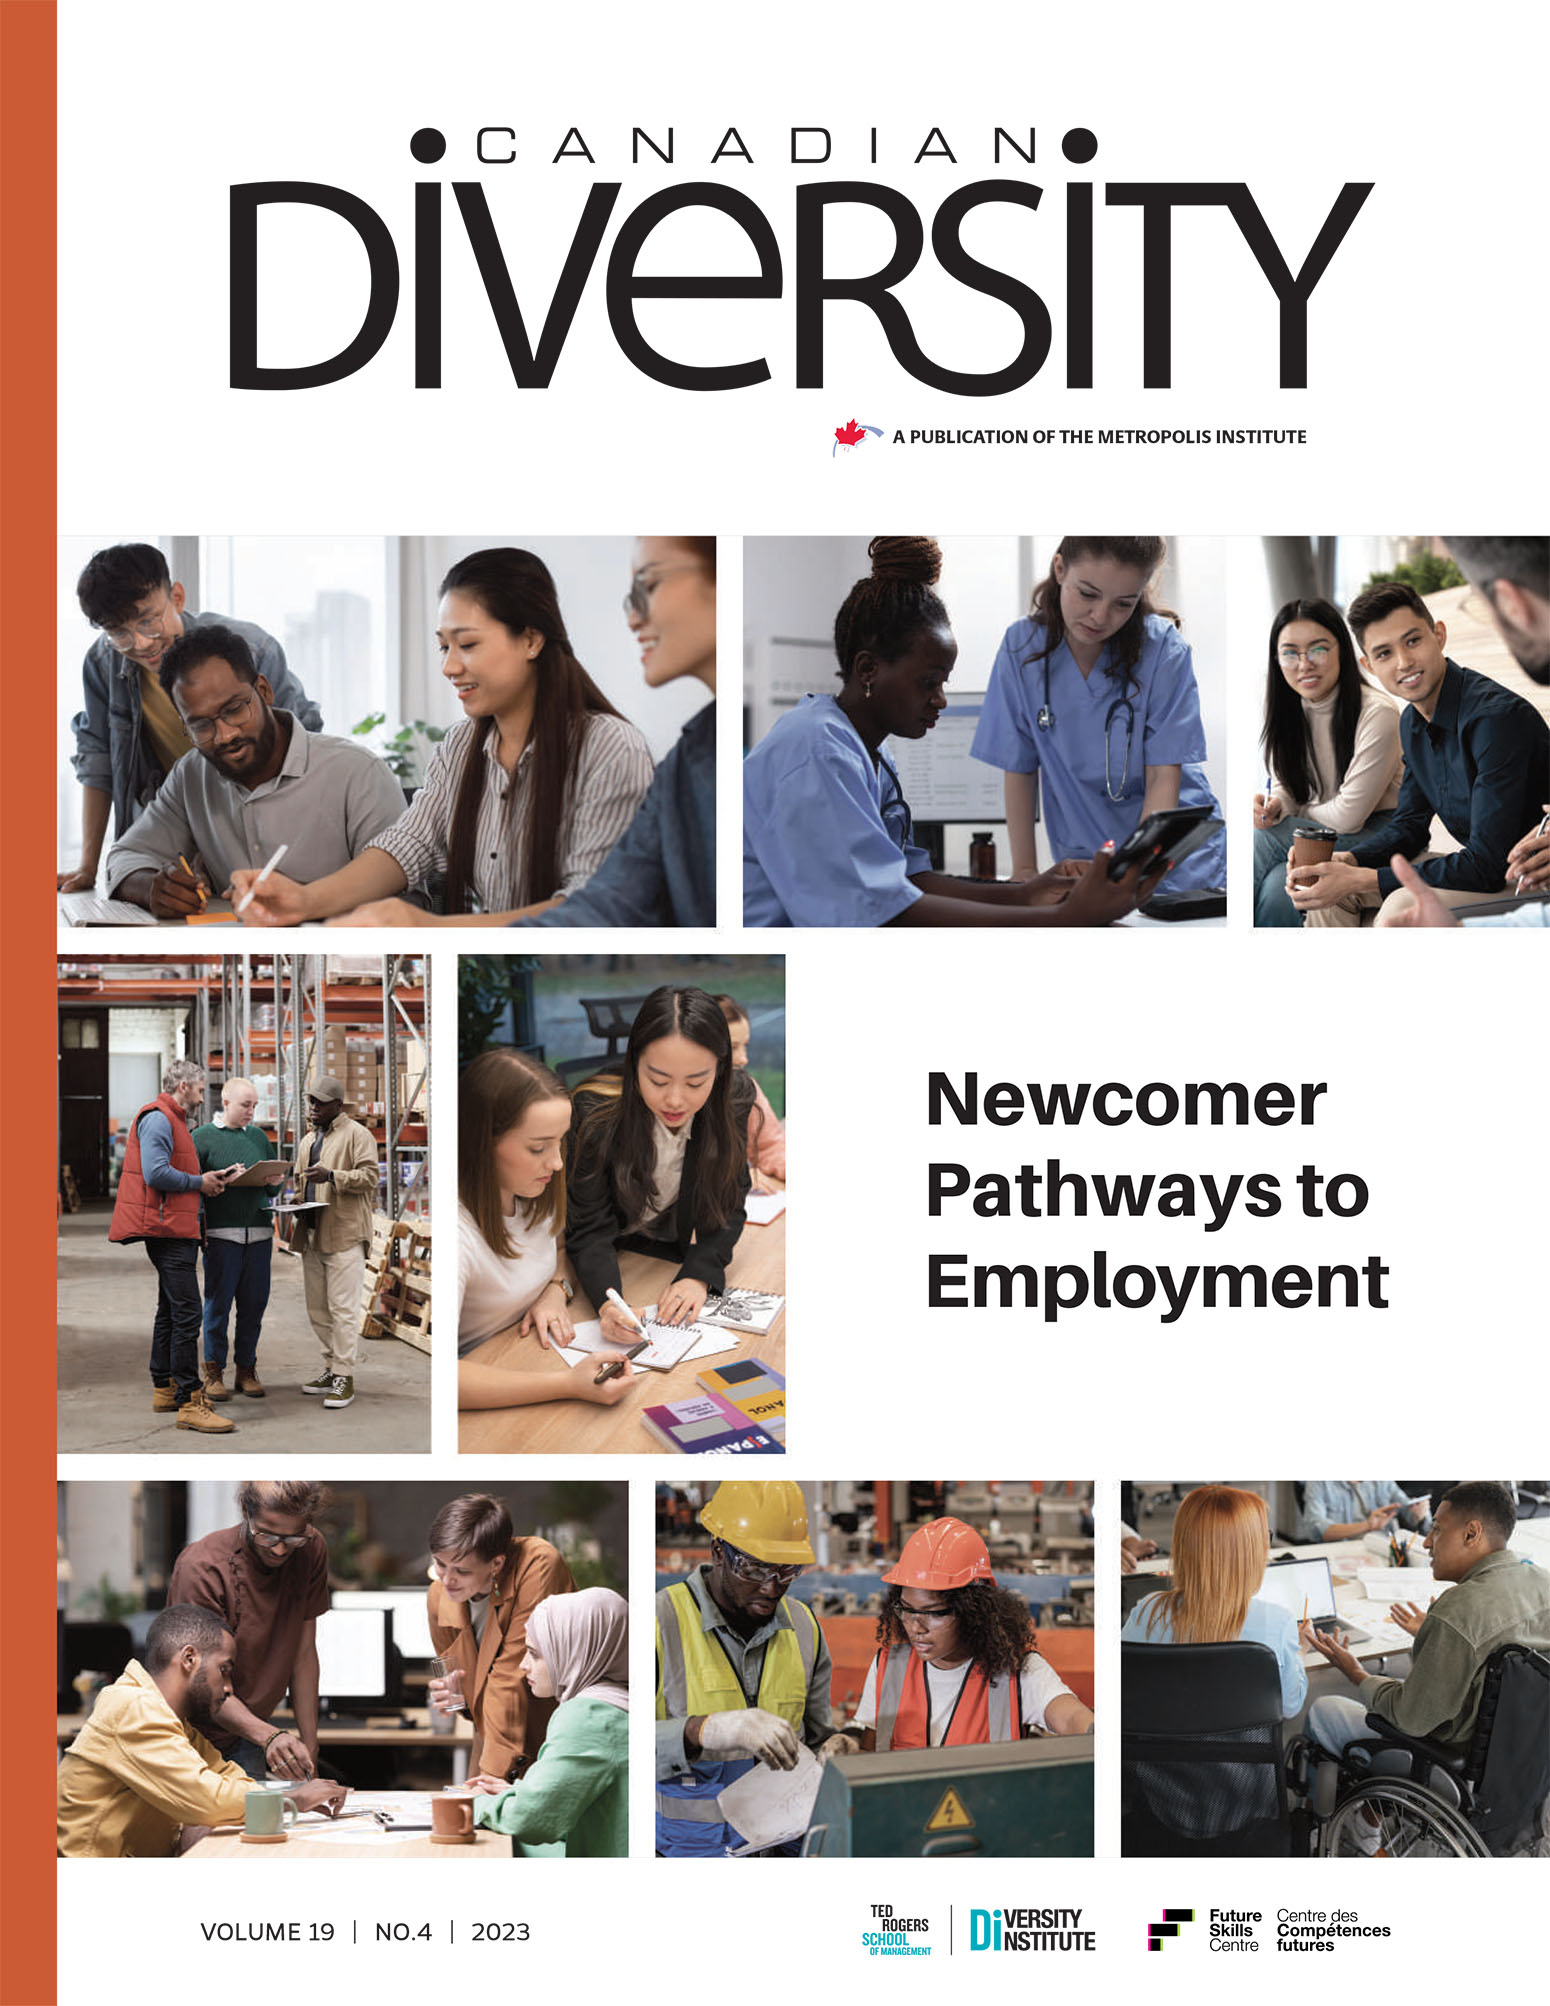 Canadian Diversity magazine cover shows a collage of diverse workers in different settings including a hospital, office and warehouse.